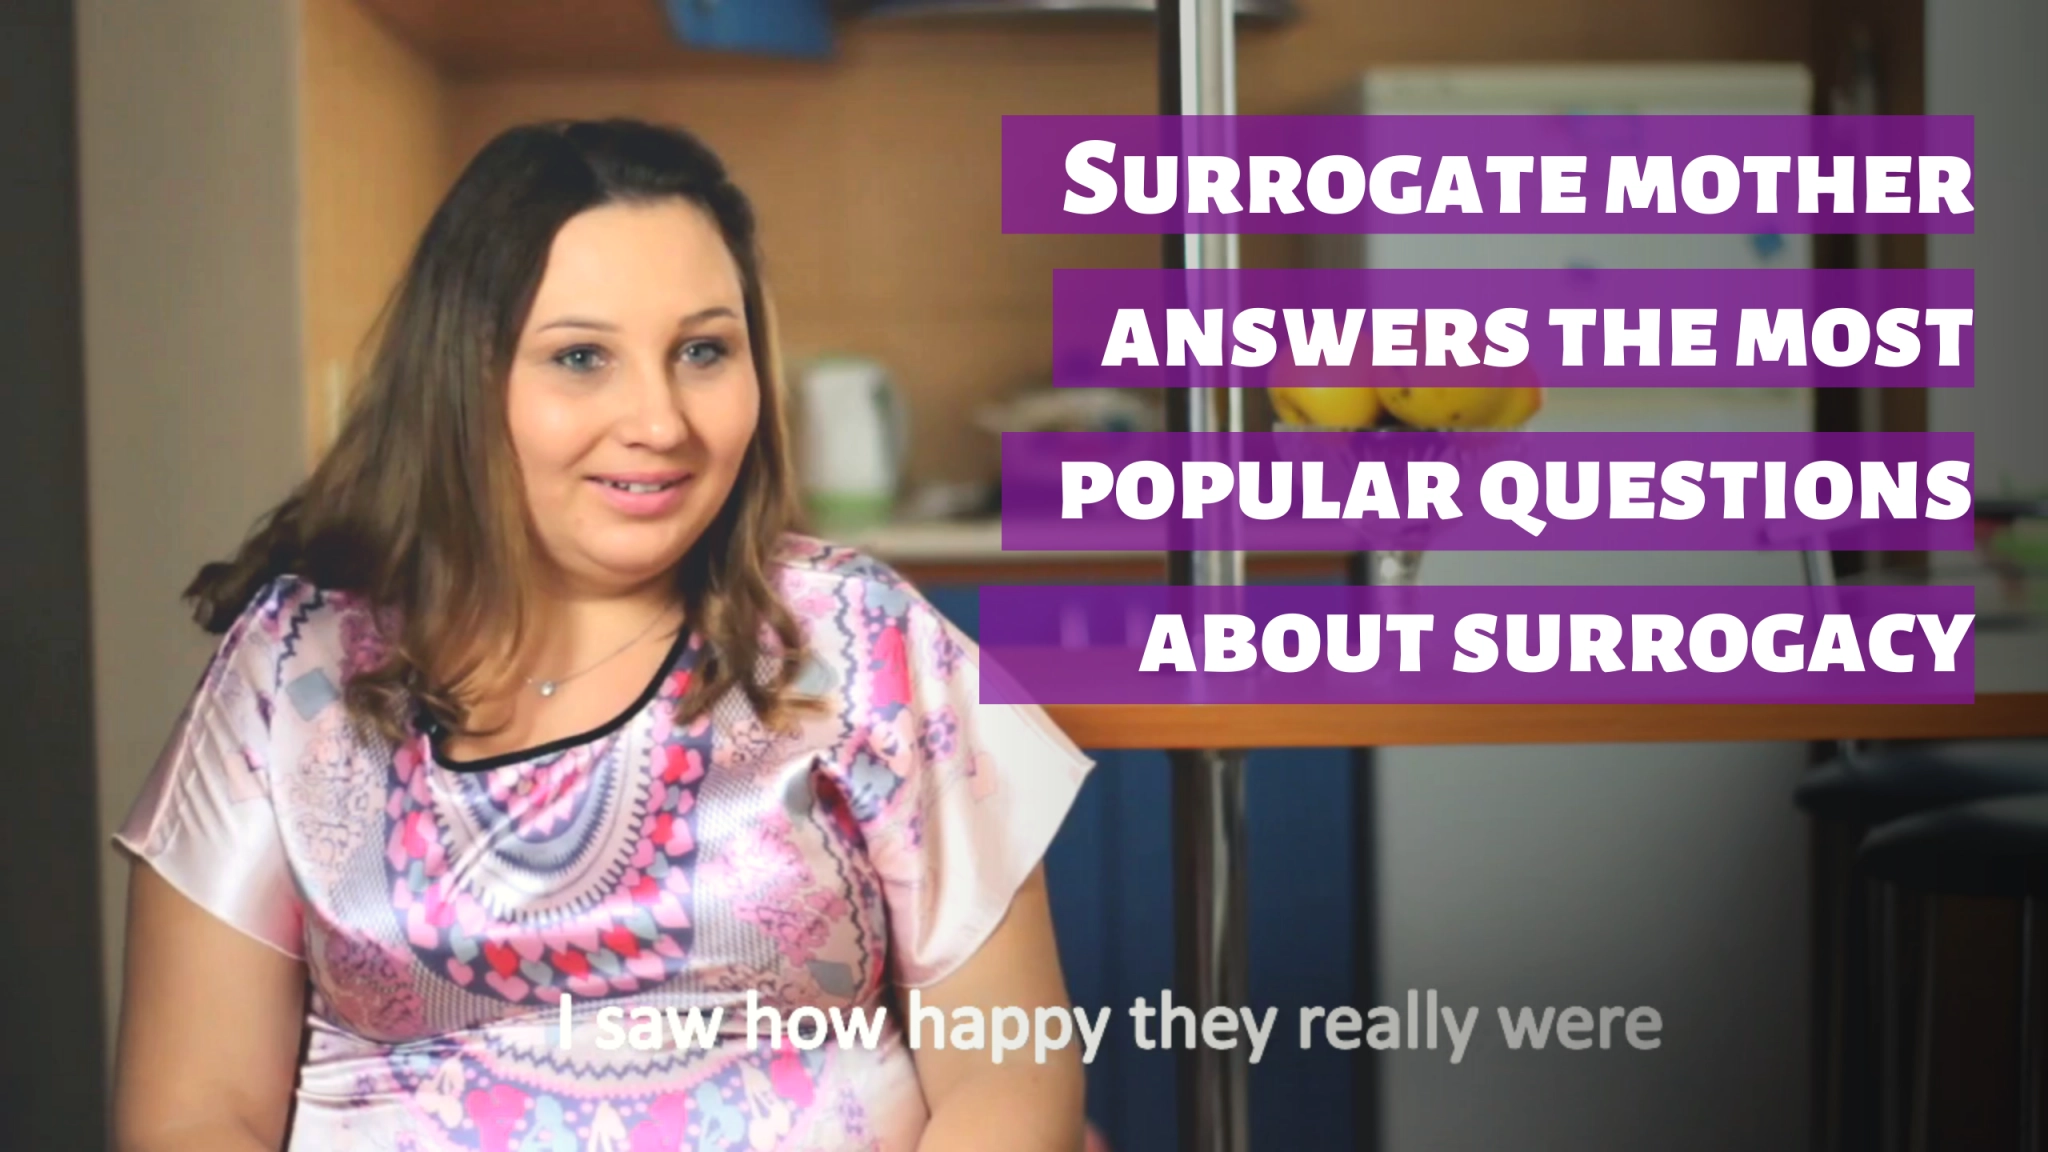 Interview with a surrogate mother